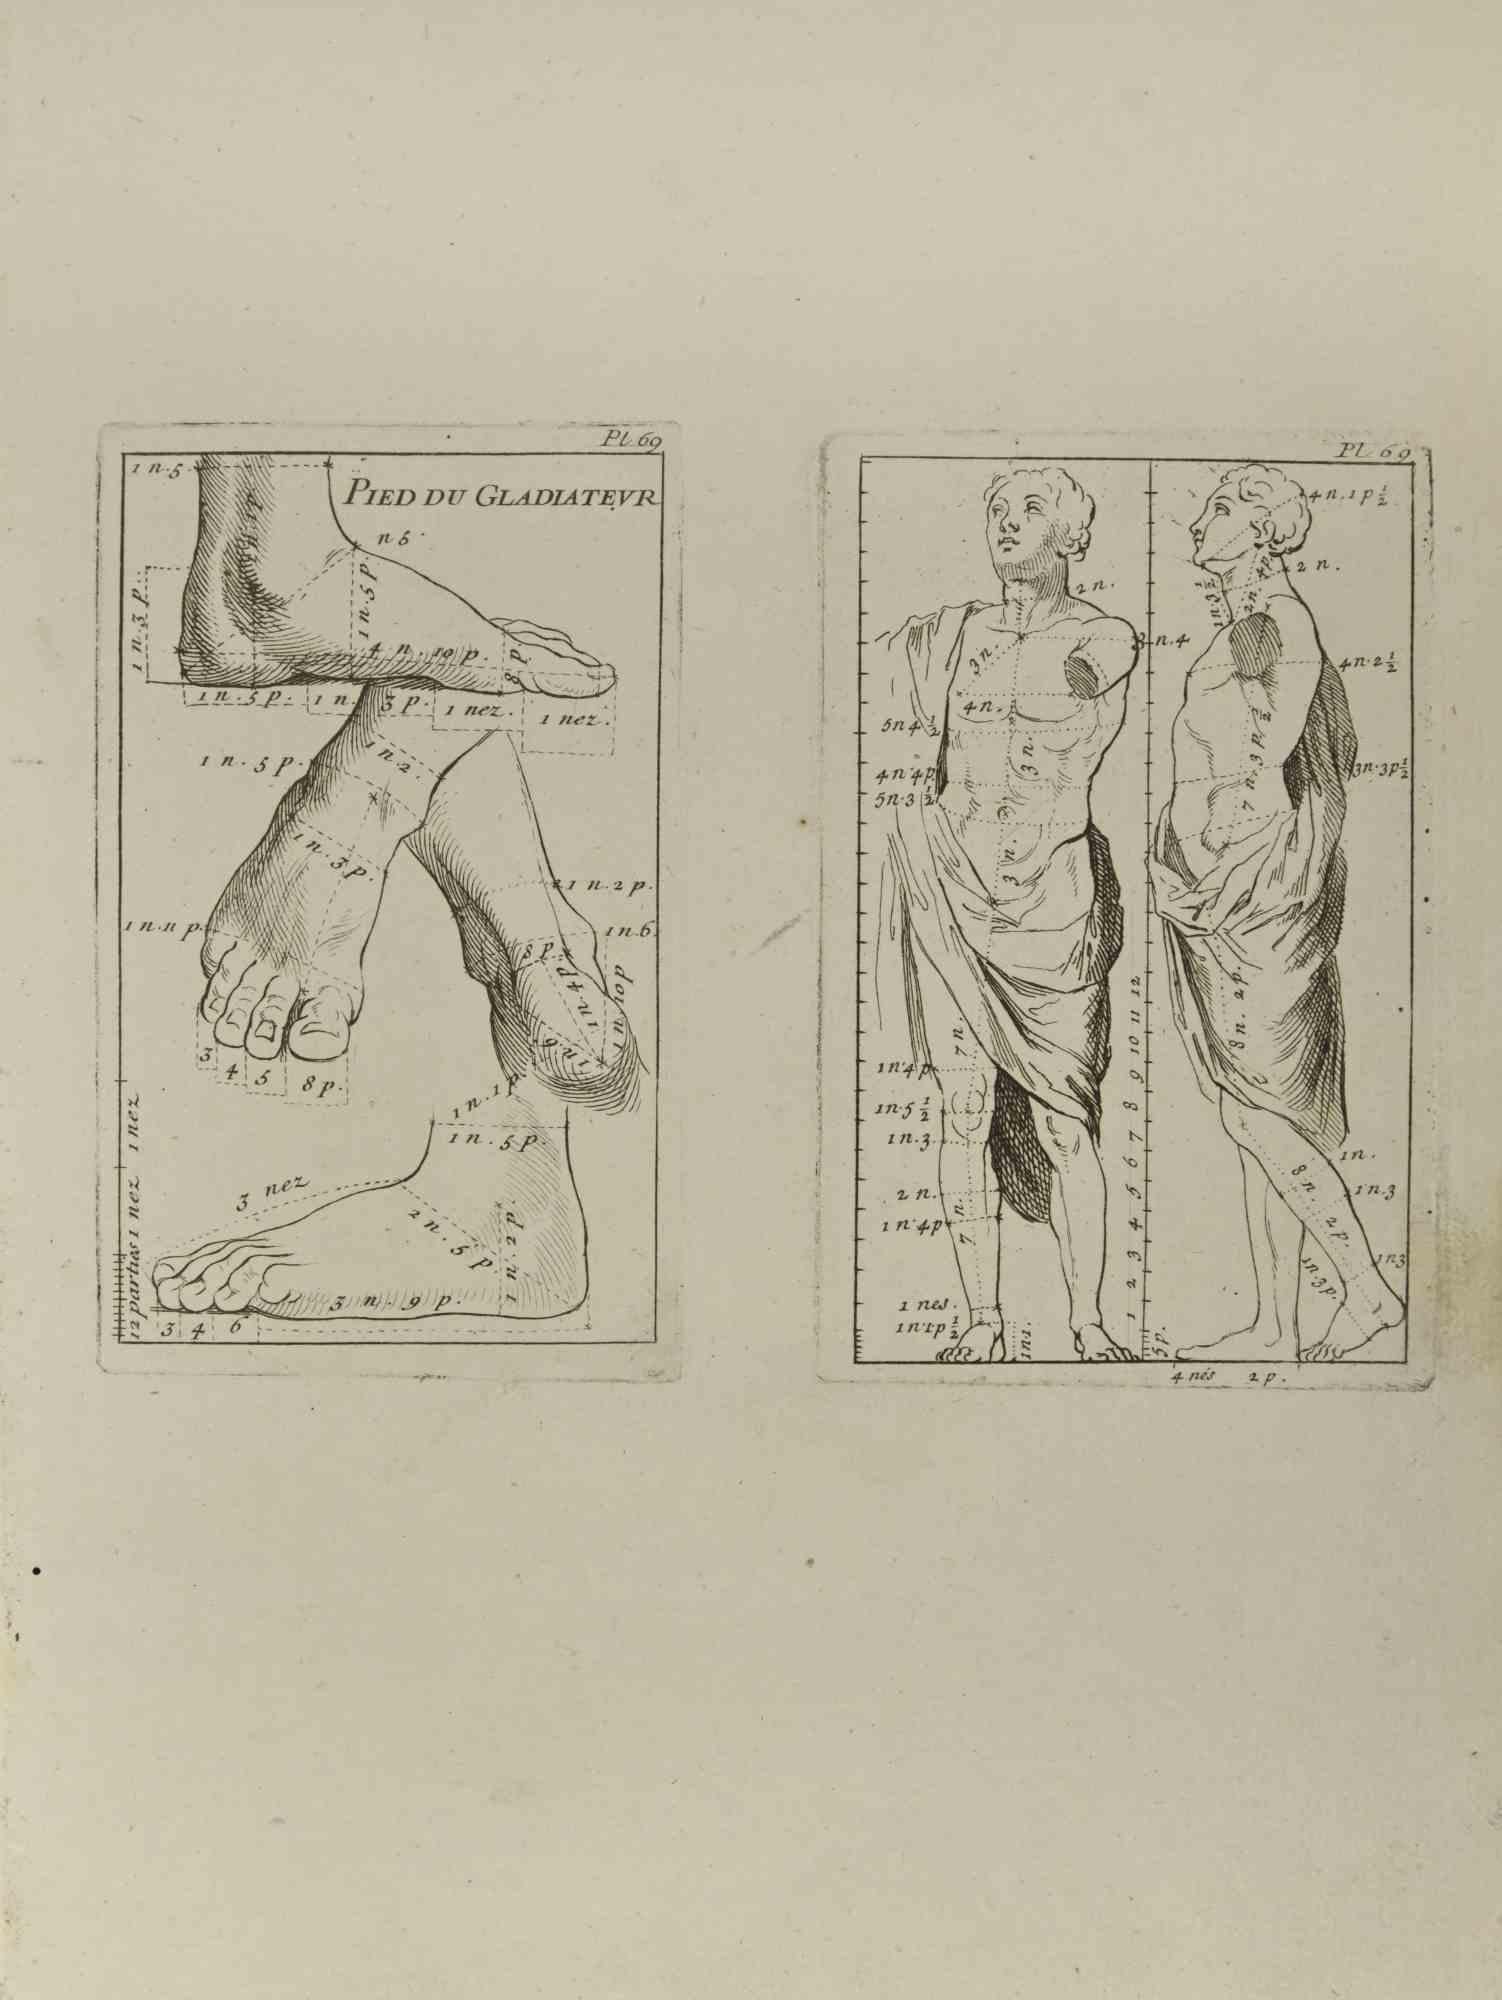 Anatomy Studies is an etching realized by Jean Francois Poletnich in 1755.

Good conditions with foxing.

The artwork is depicted through confident strokes.

The etching was realized for the anatomy study “JOMBERT, Charles-Antoine (1712-1784) -